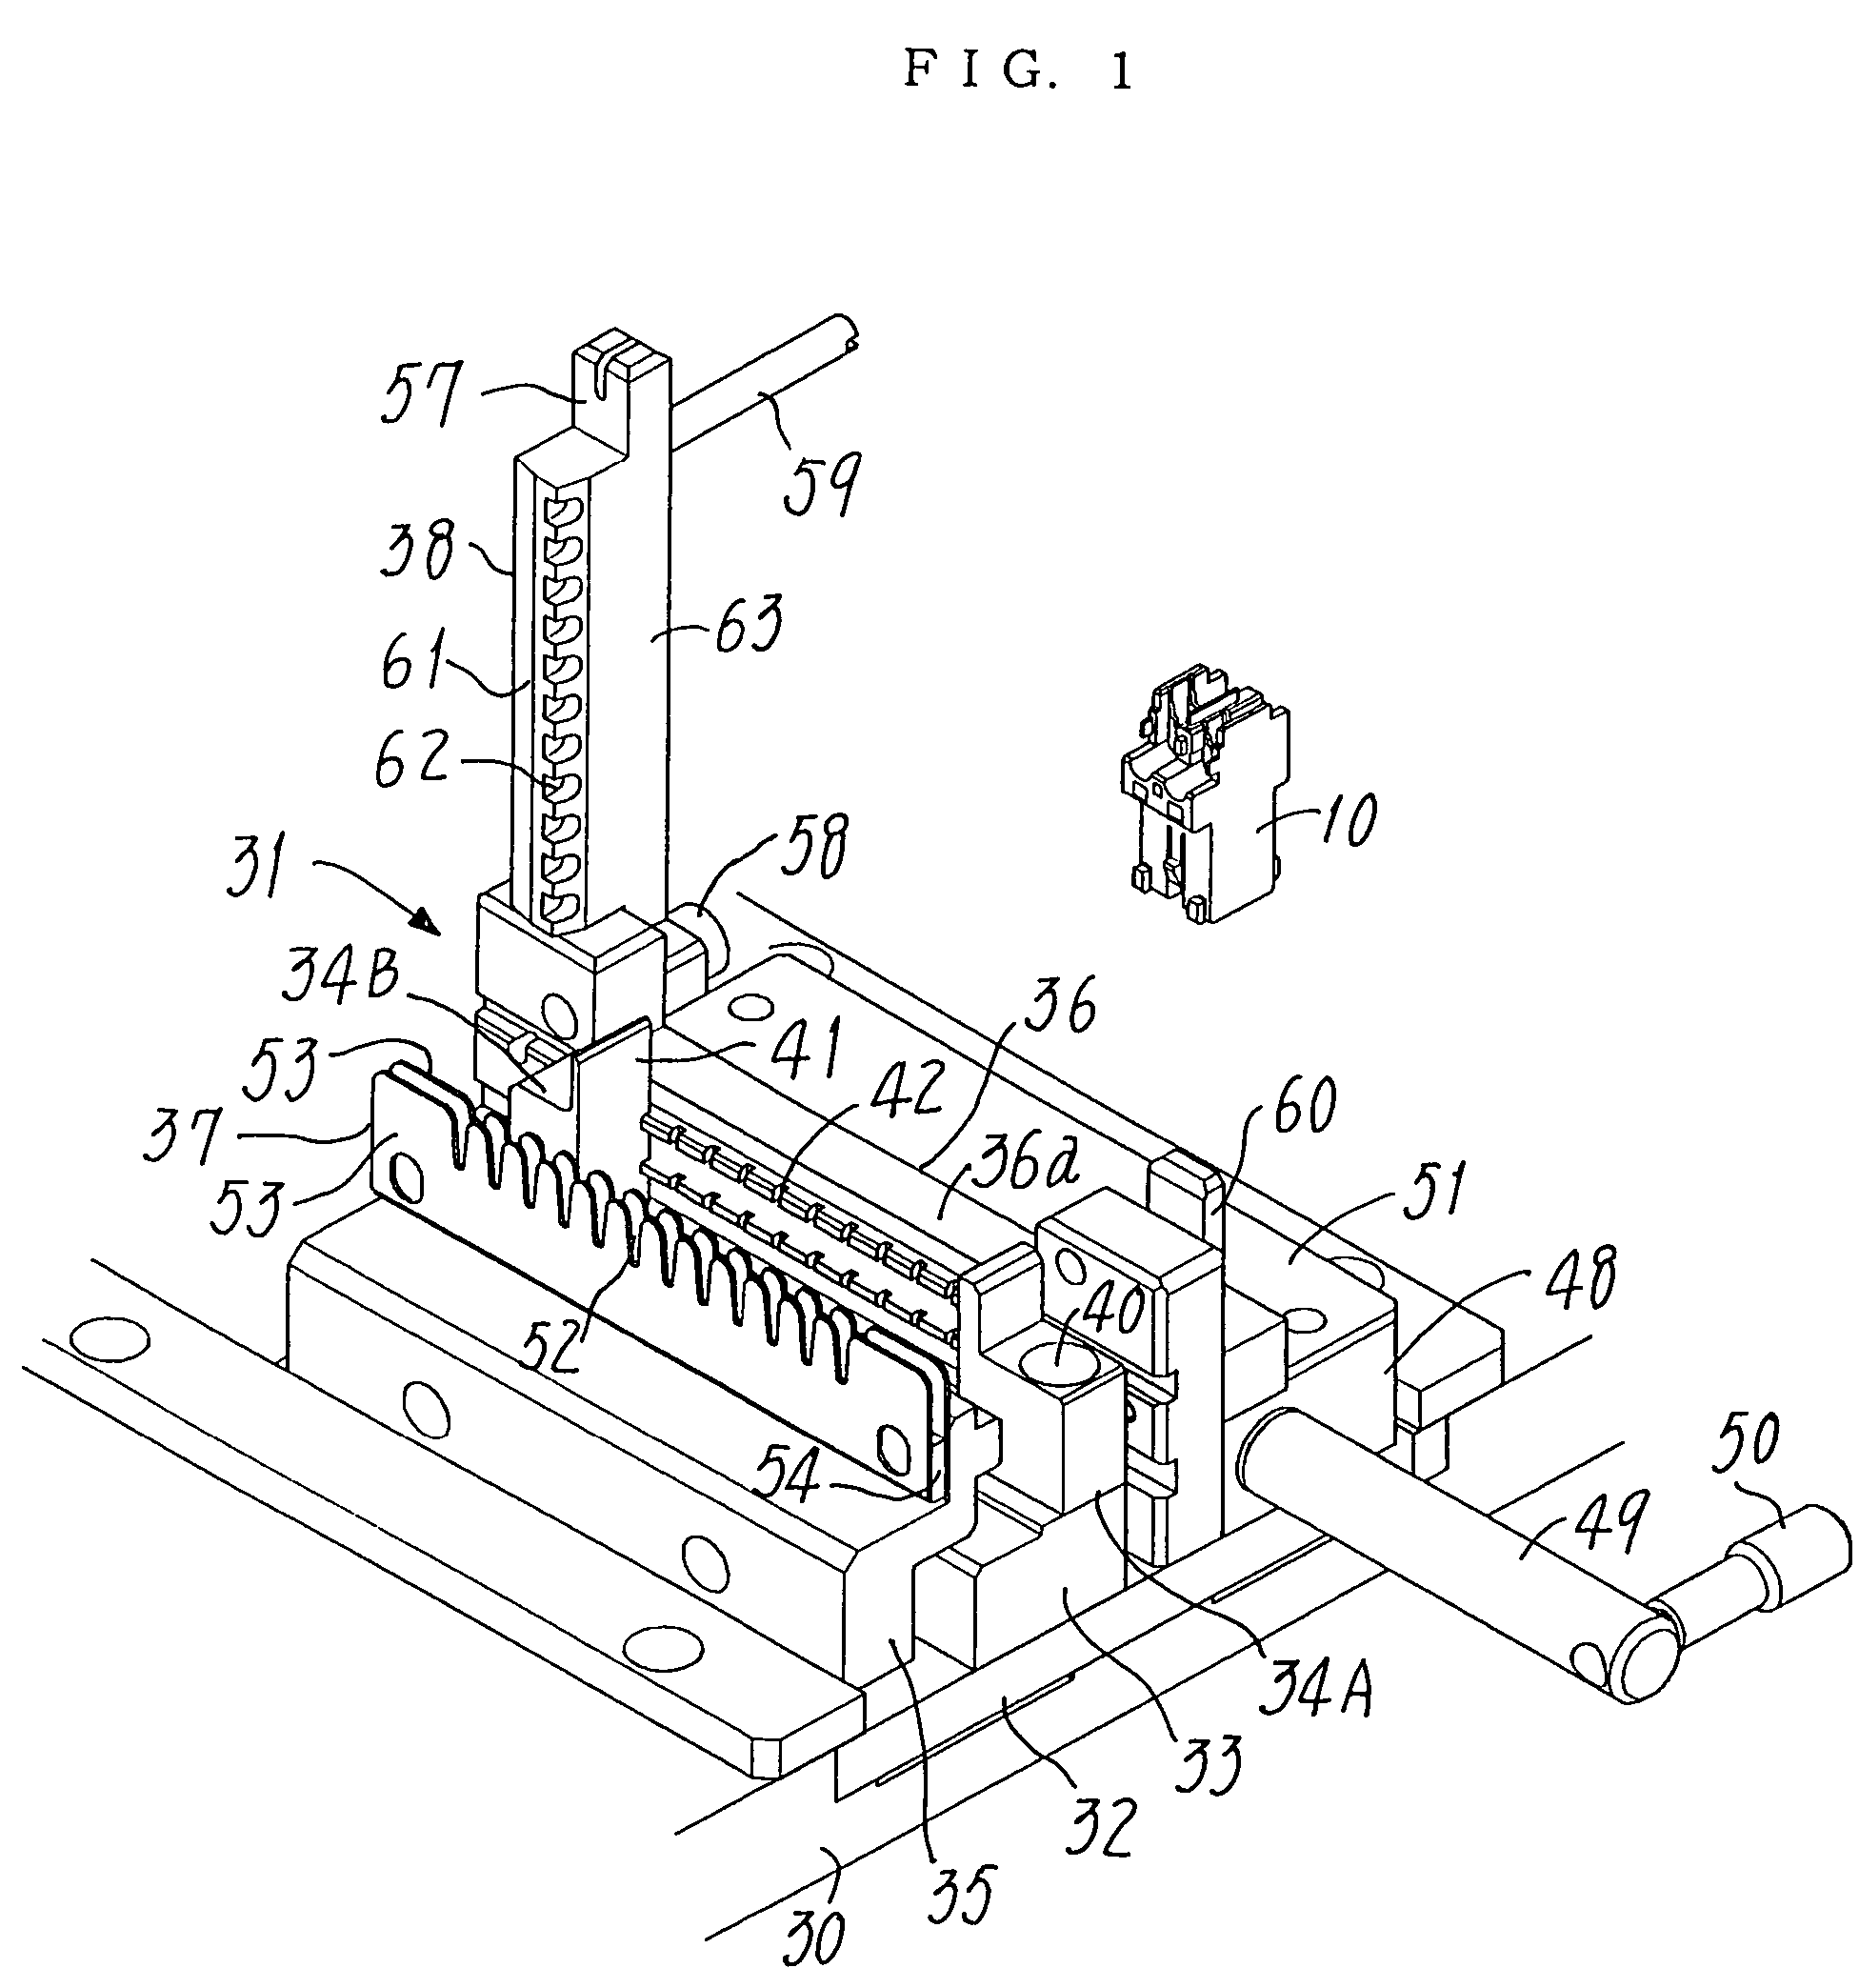 Manual machine for attaching an insulation displacement type connector